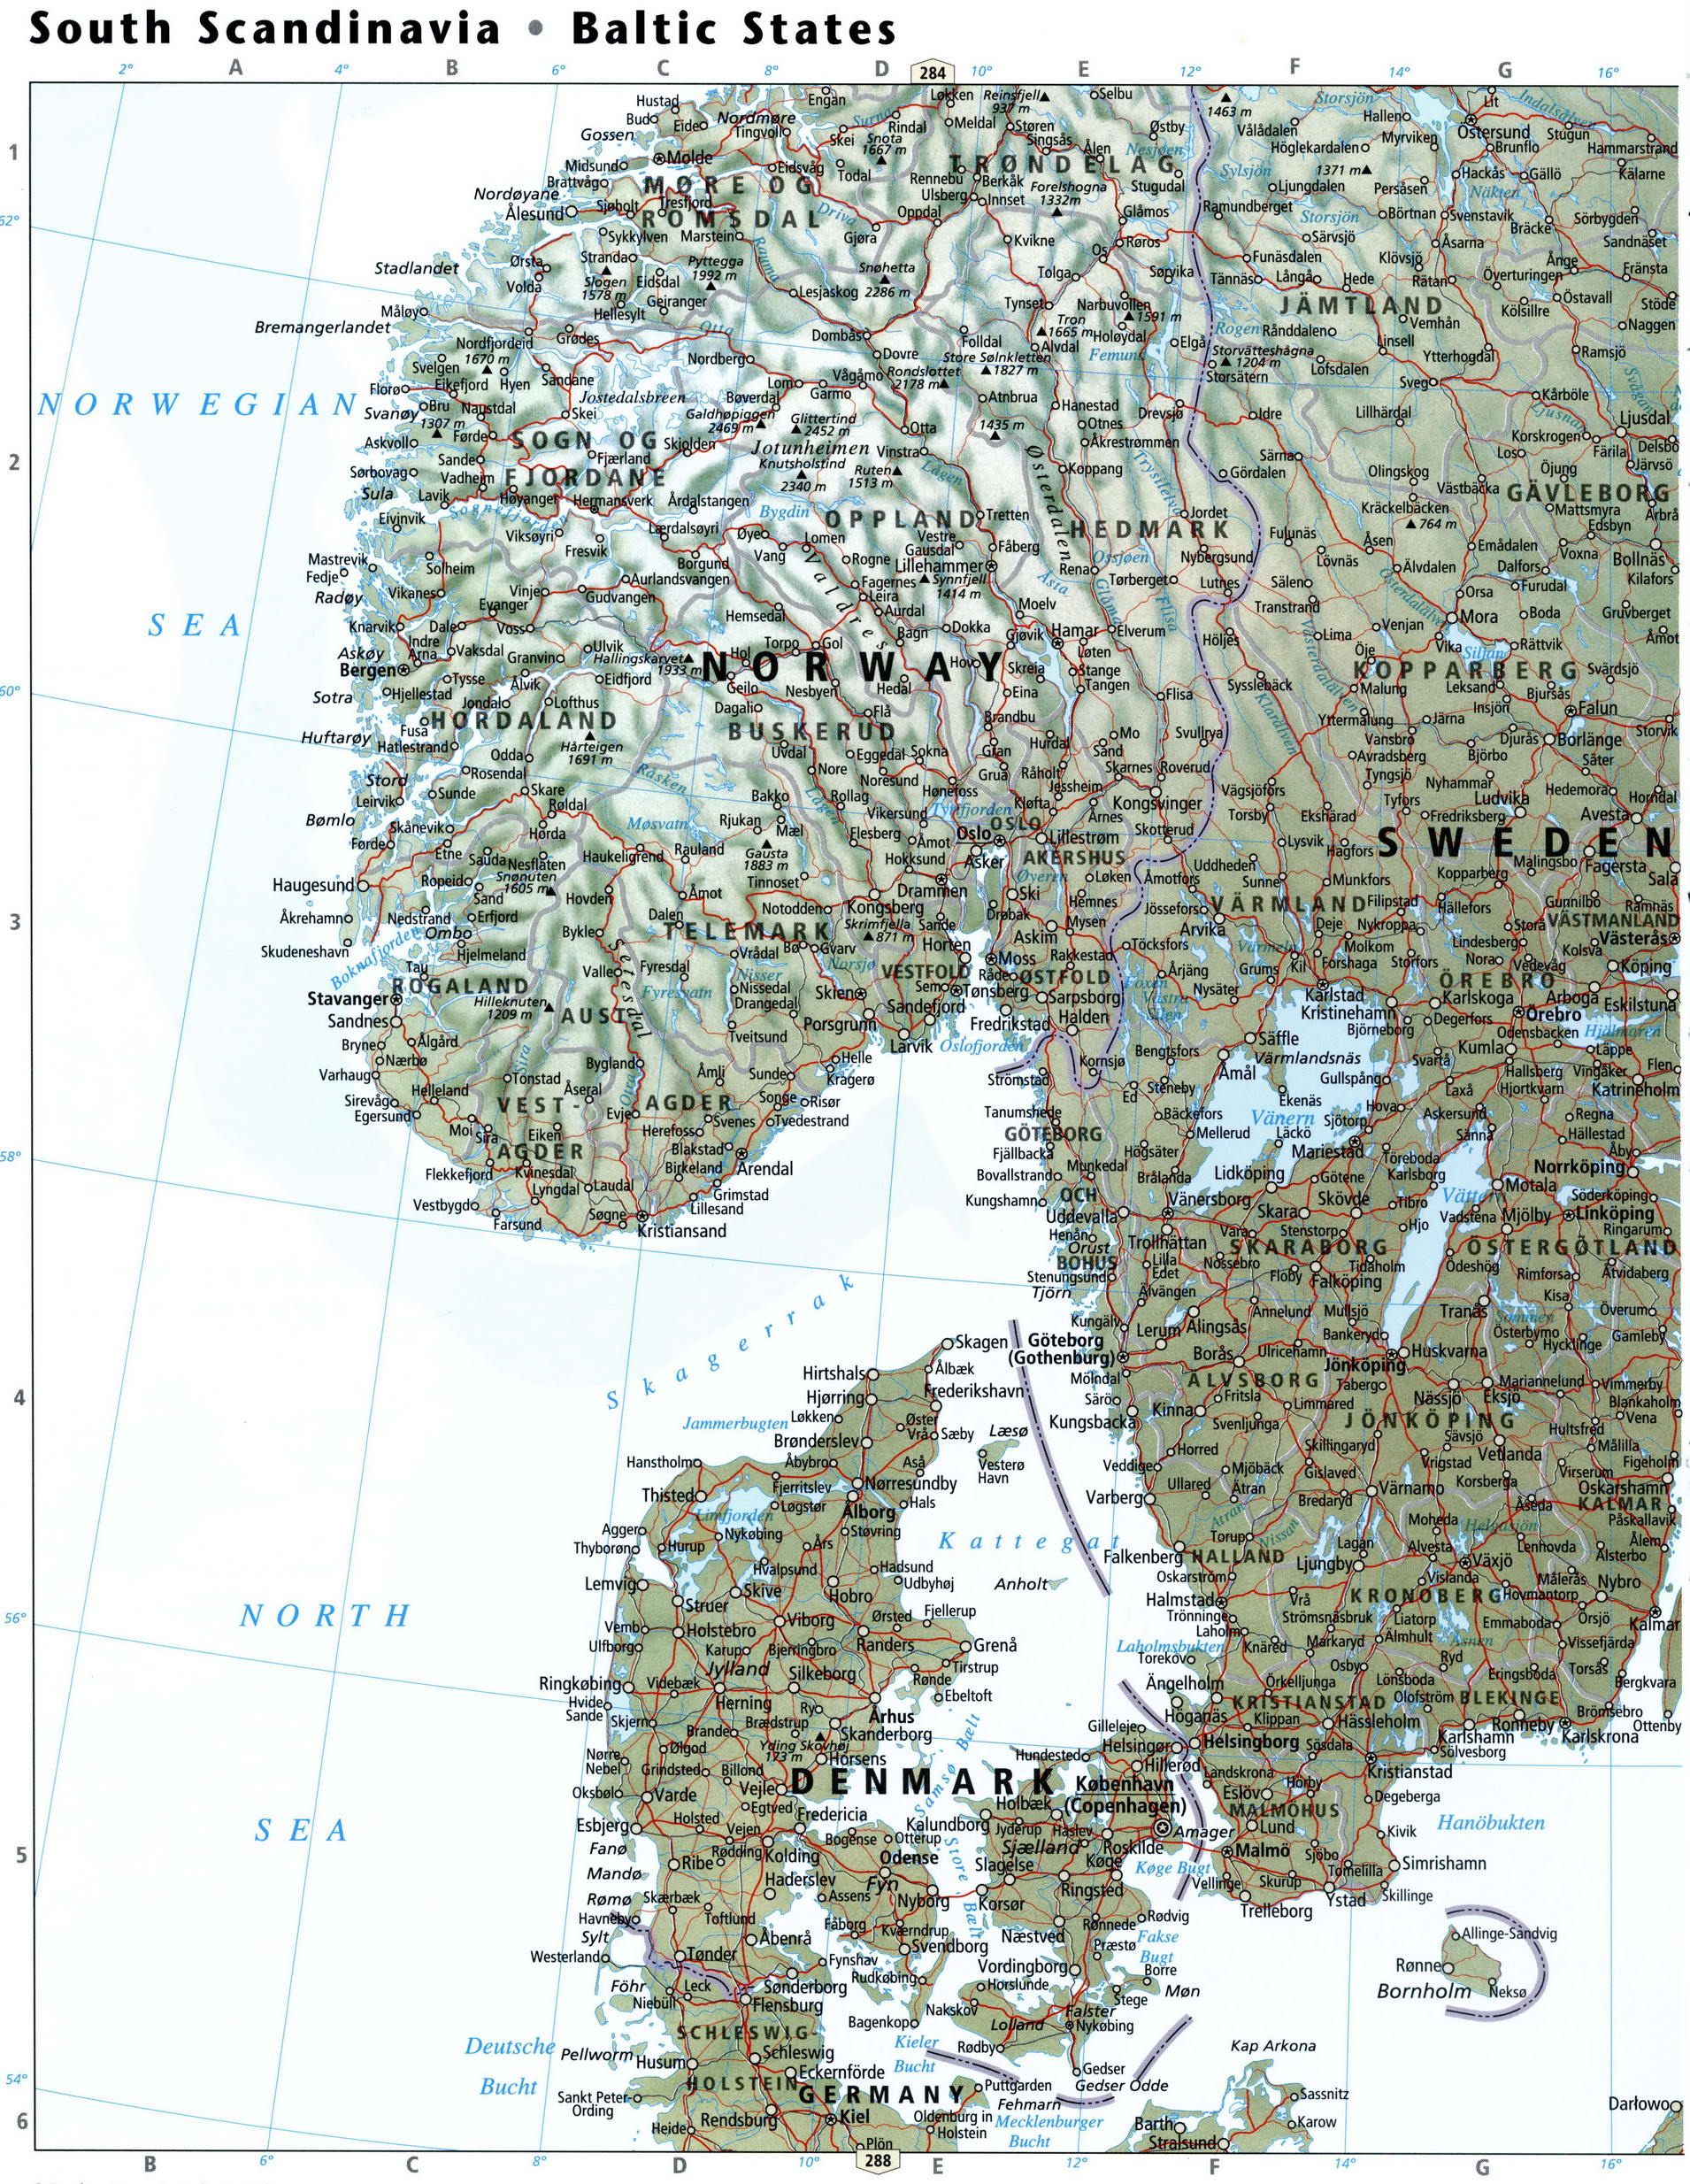 Norway and Sweden map